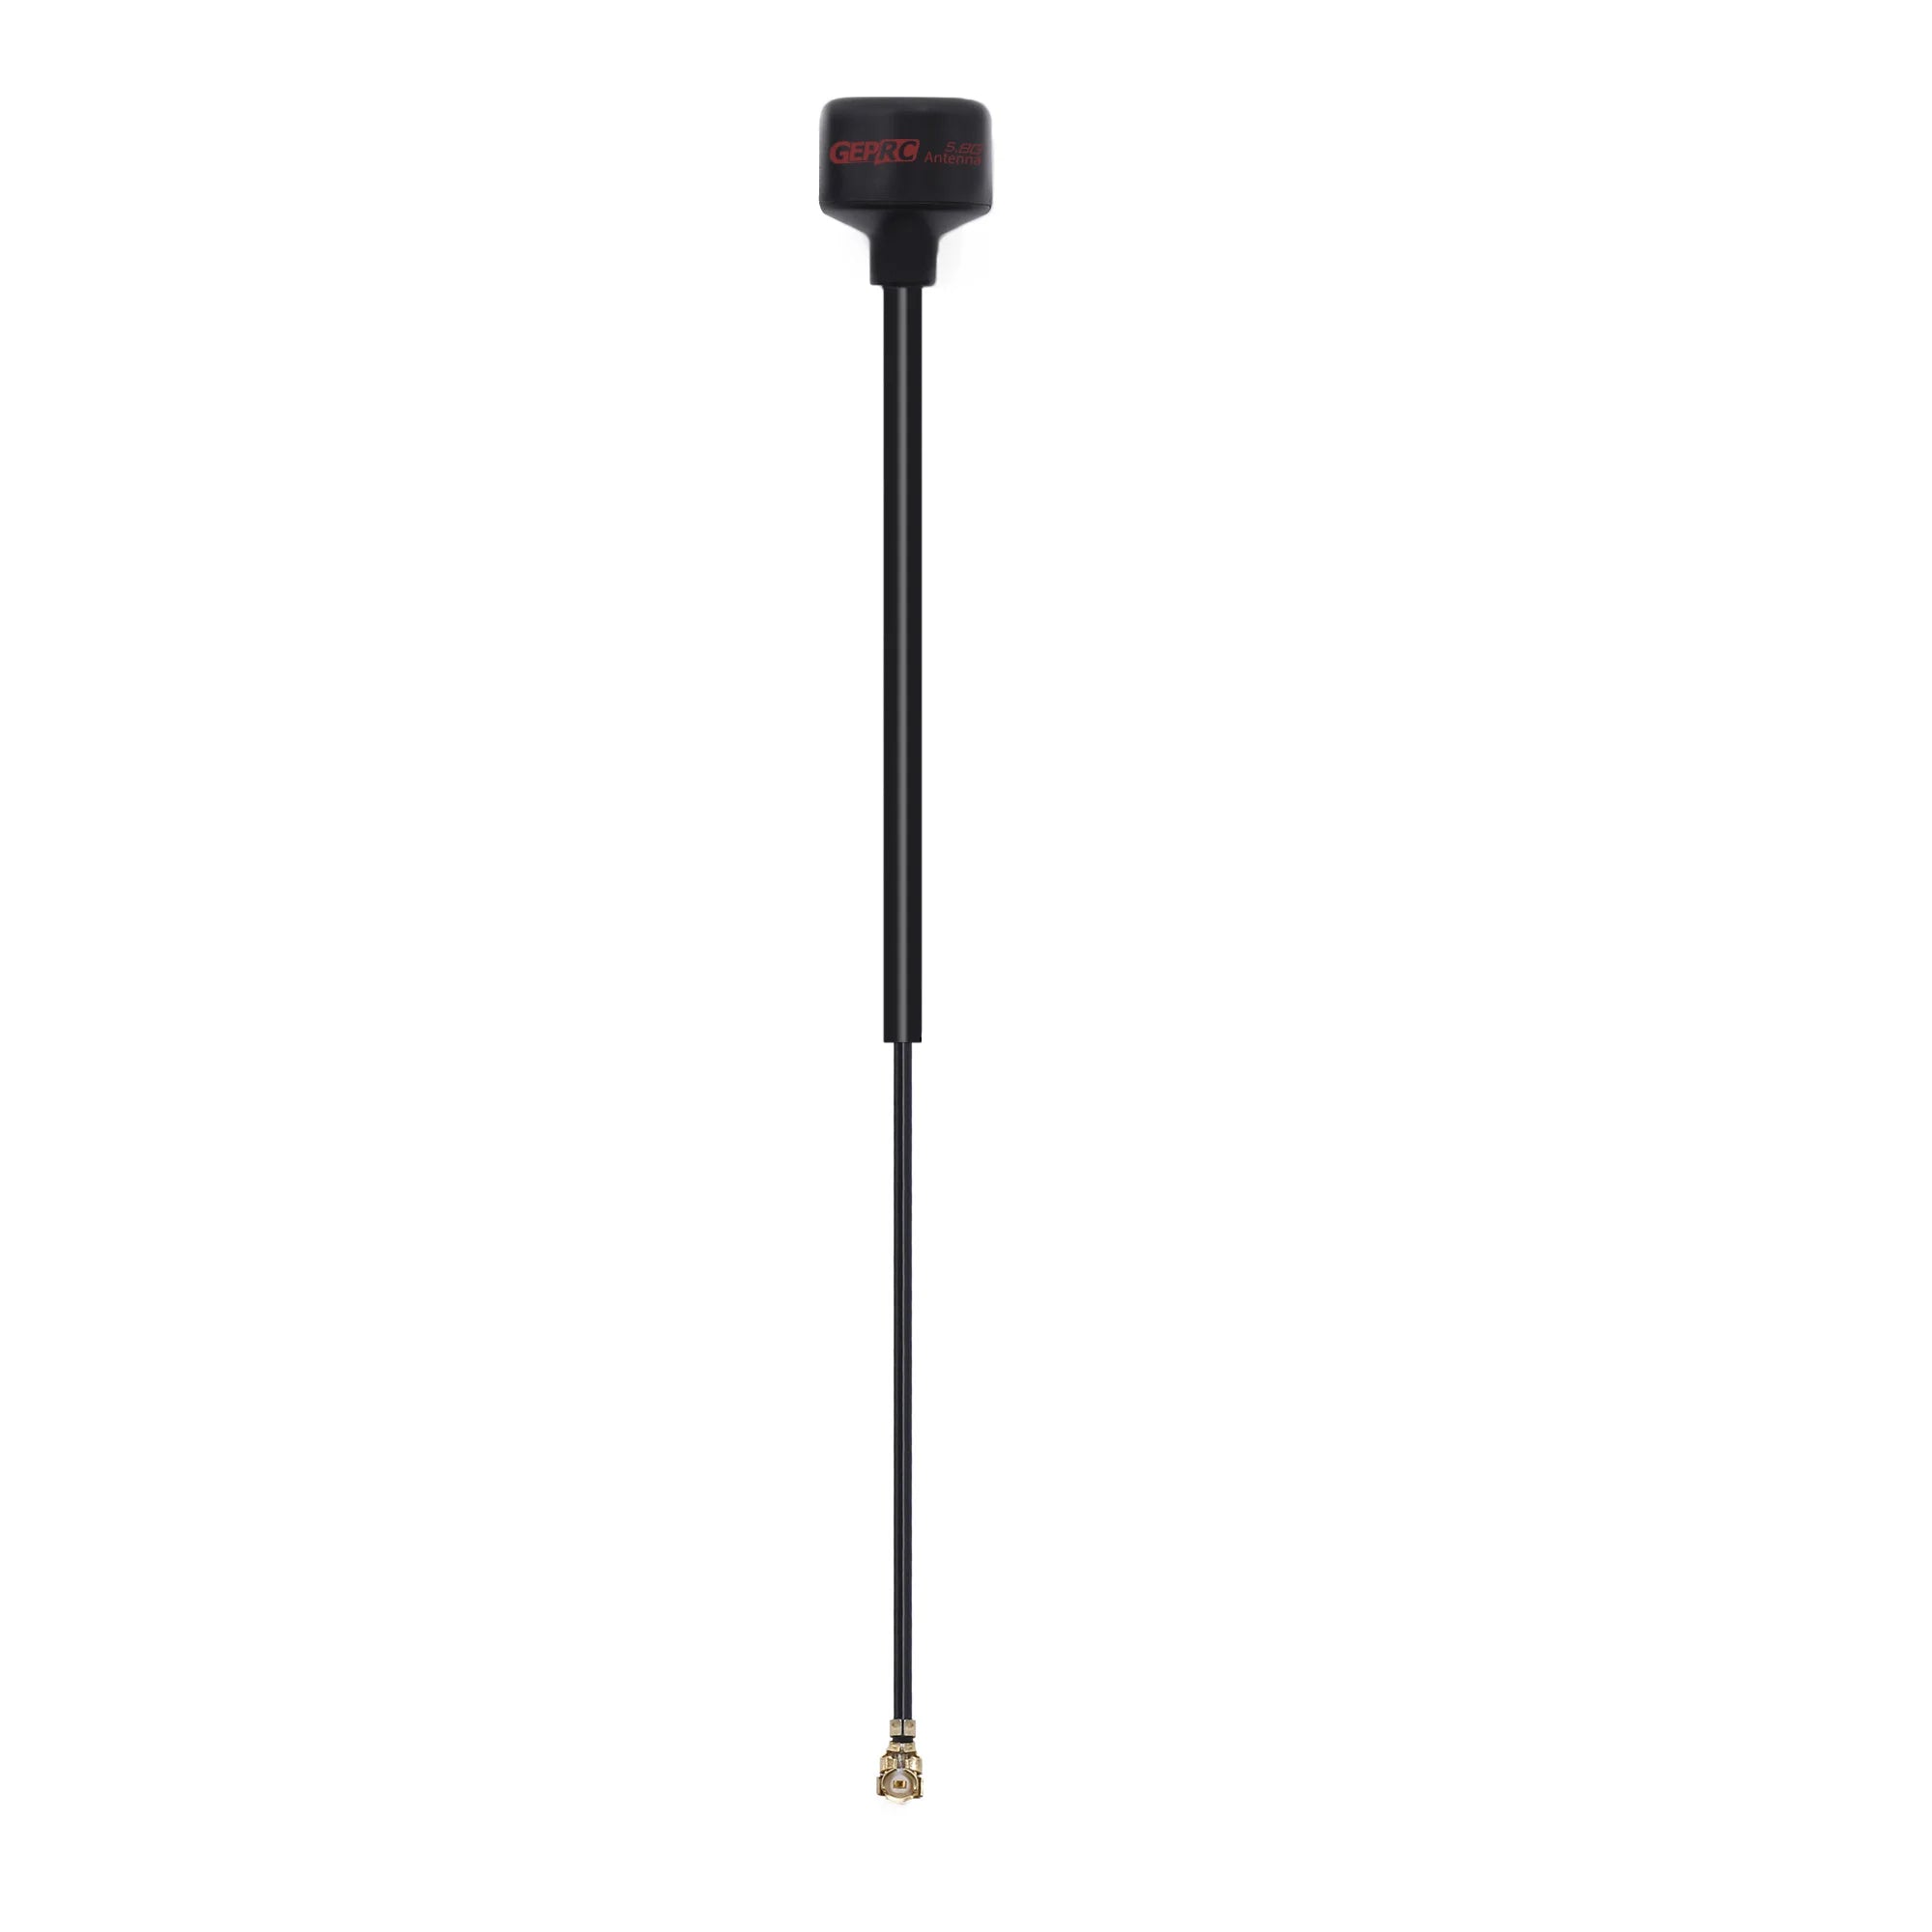 GEPRC Momoda 5.8G Antenna, every antenna has been tested strictly before leaving the factory to ensure good performance